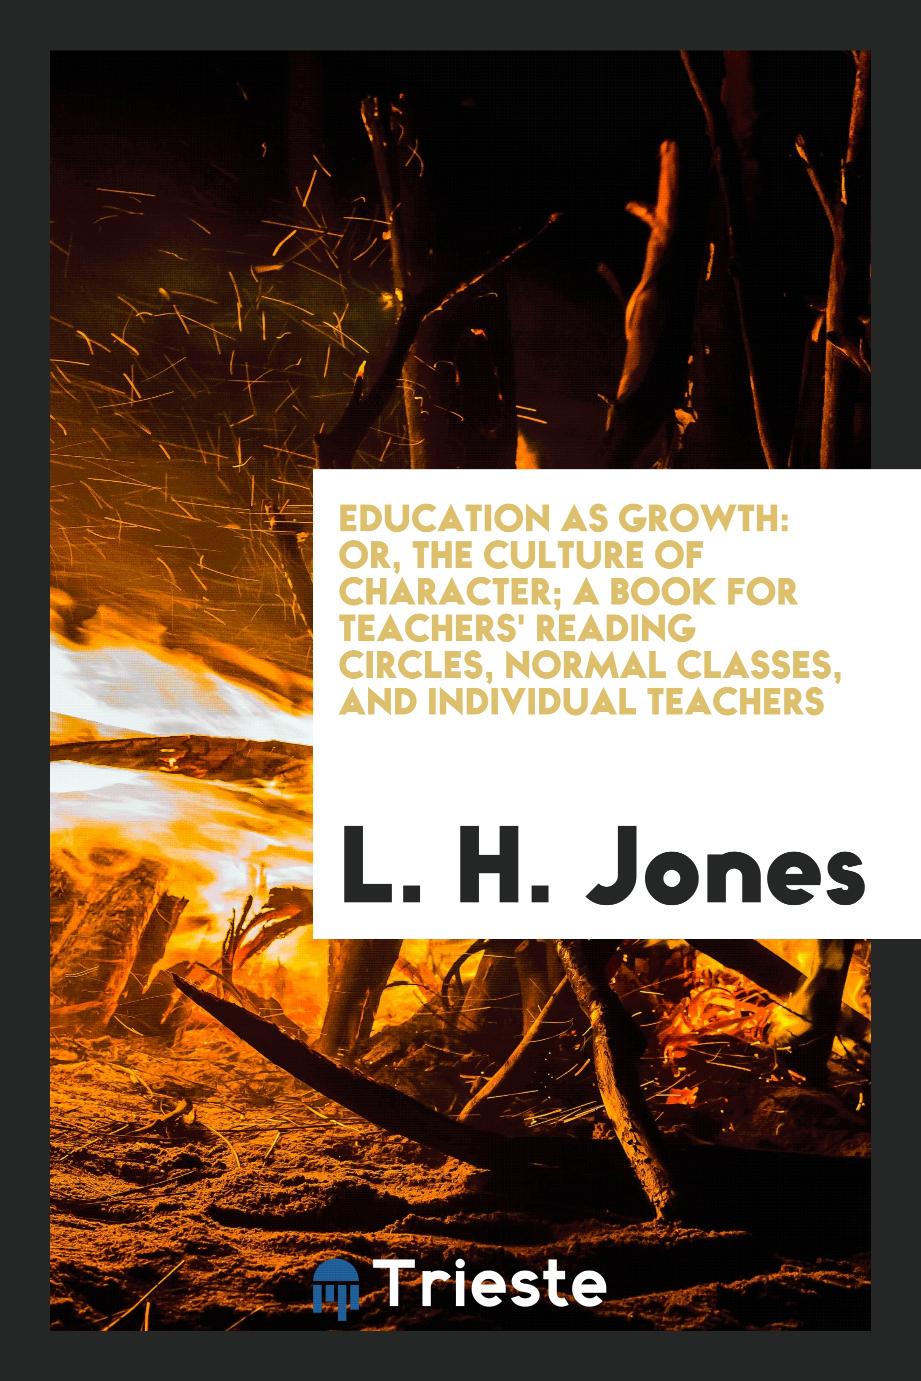 Education as Growth: Or, The Culture of Character; A Book for Teachers' Reading Circles, Normal Classes, and Individual Teachers